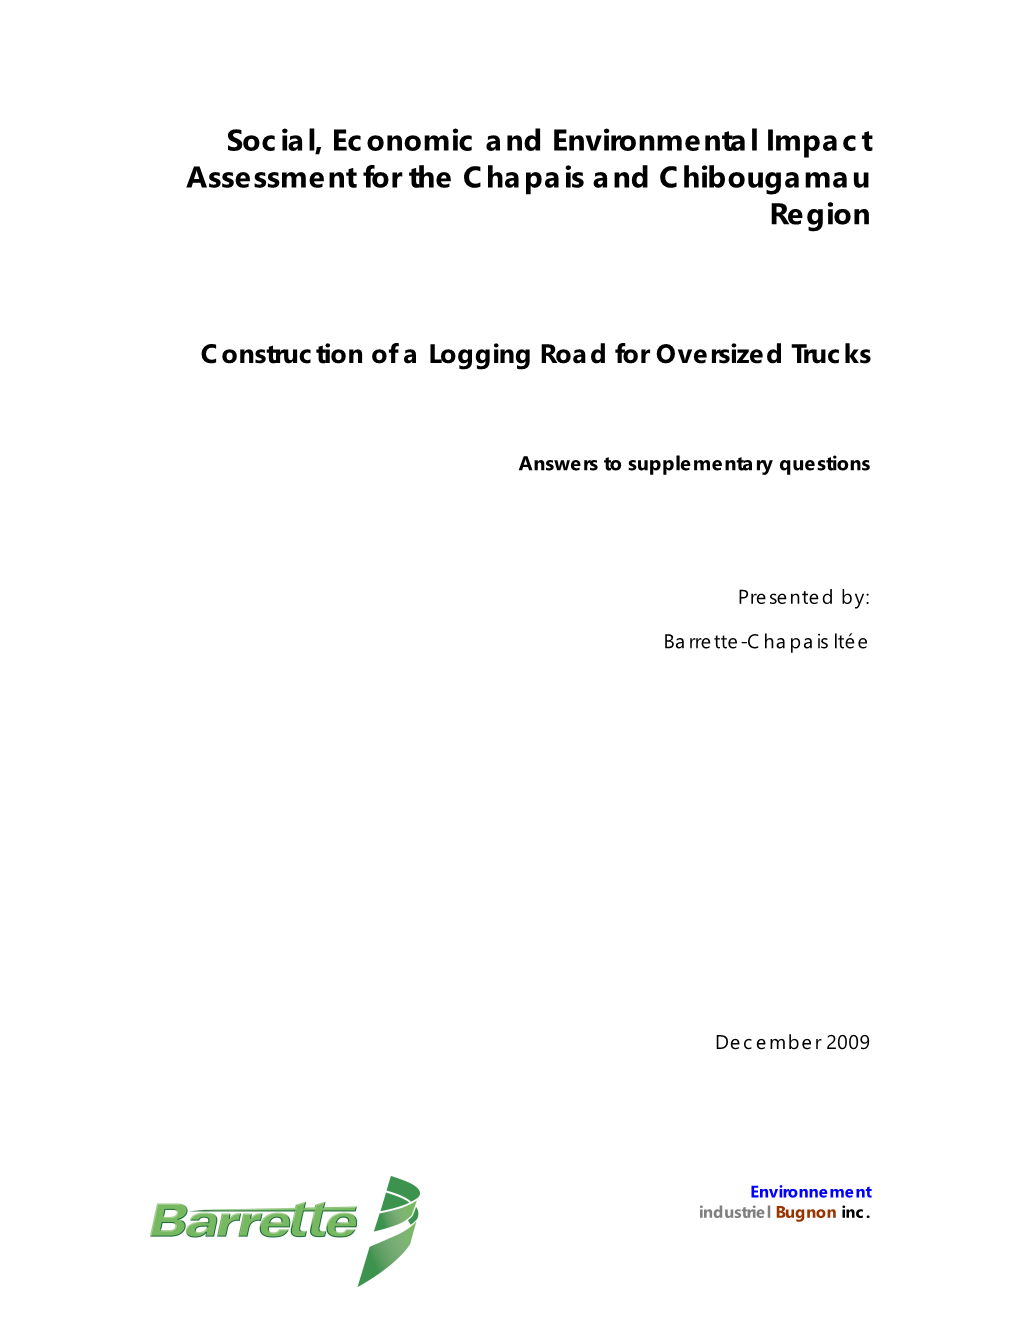 Social, Economic and Environmental Impact Assessment for the Chapais and Chibougamau Region